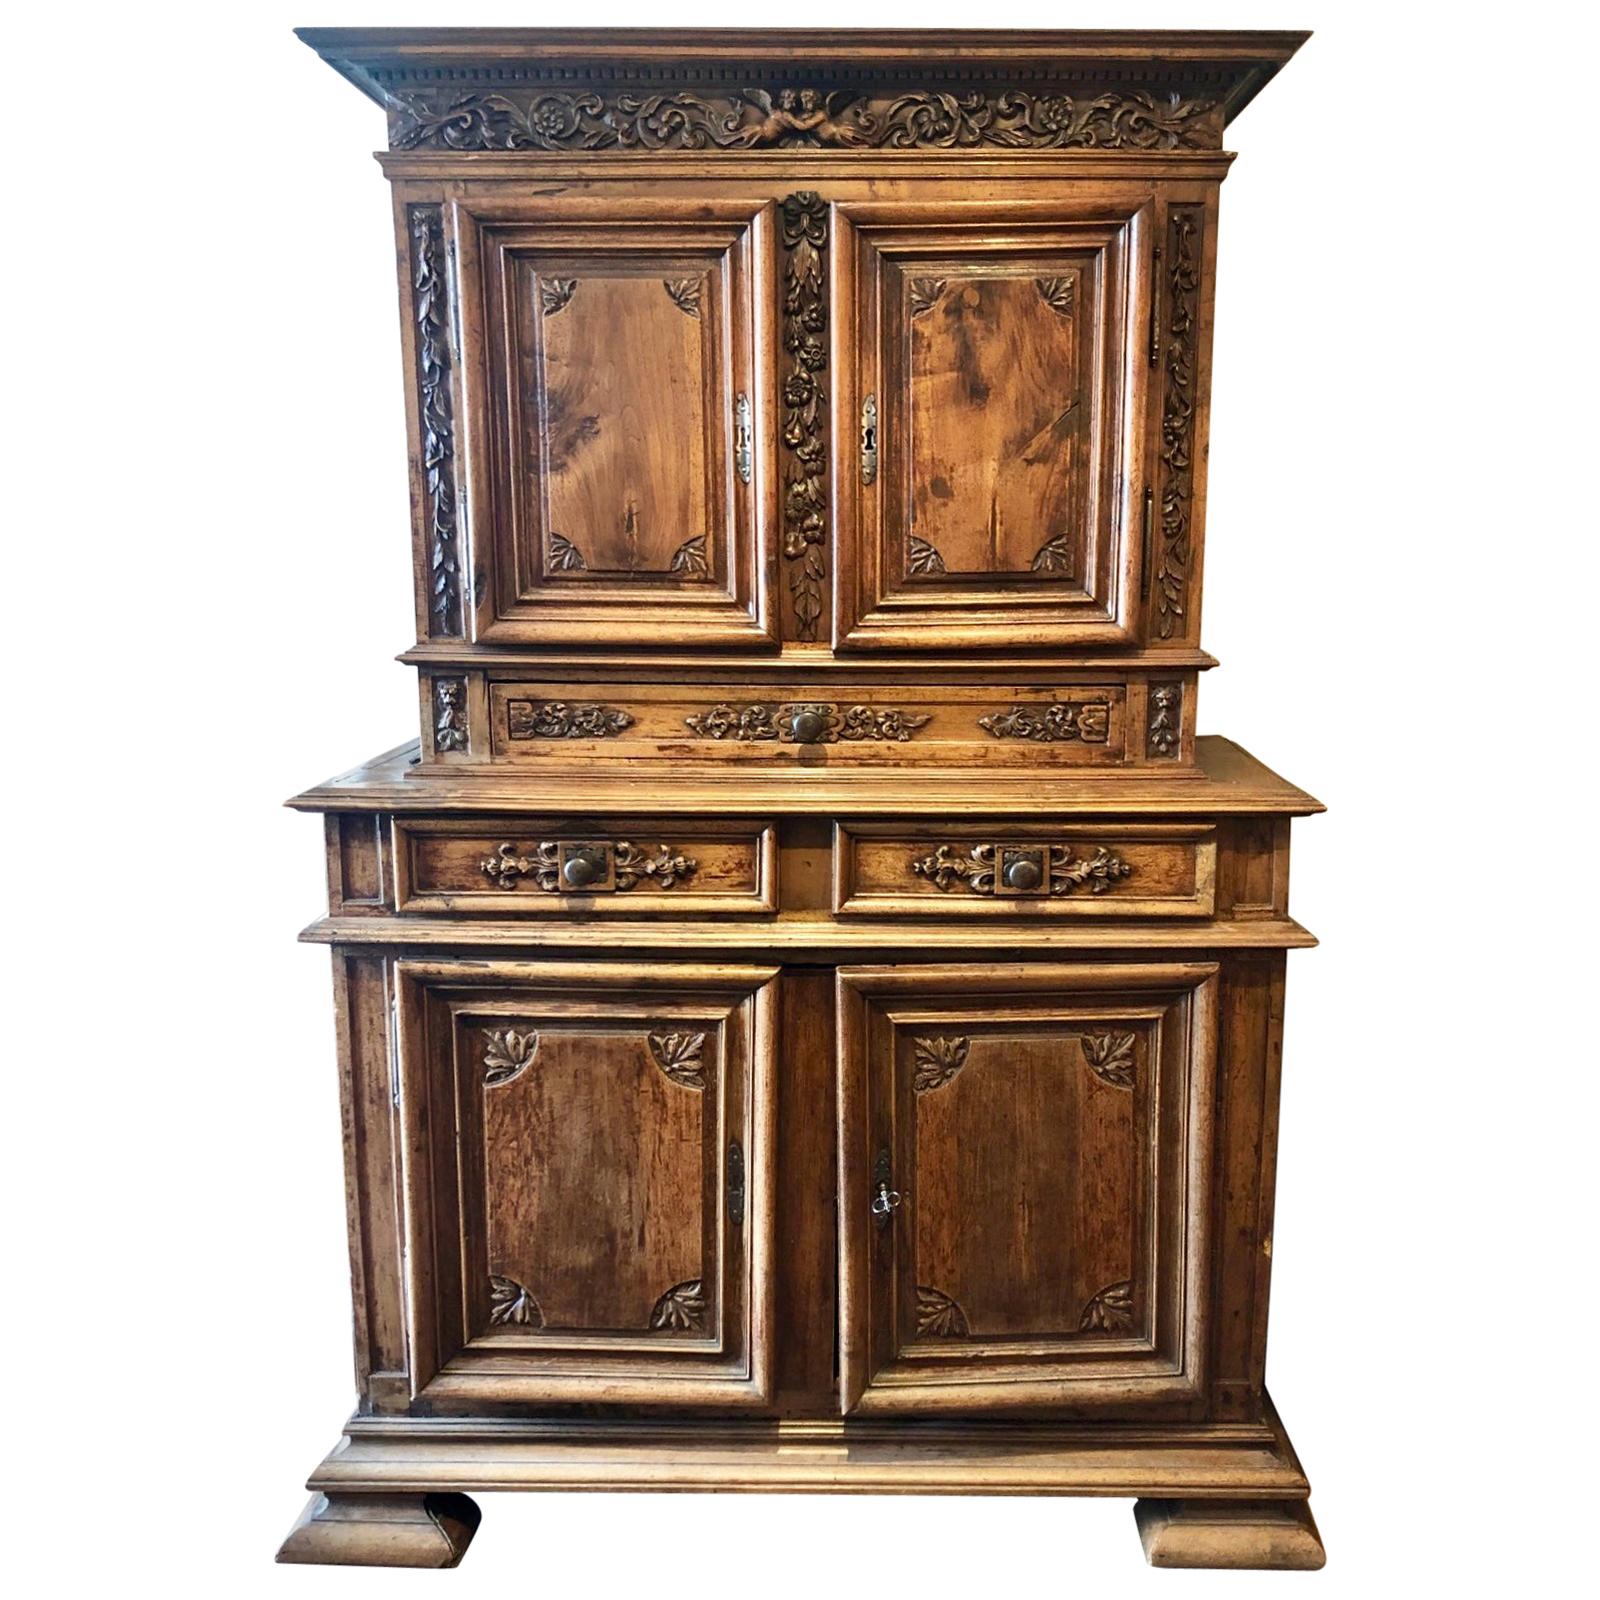 Early 18th Century Buffet Deux Corps from Provence, France